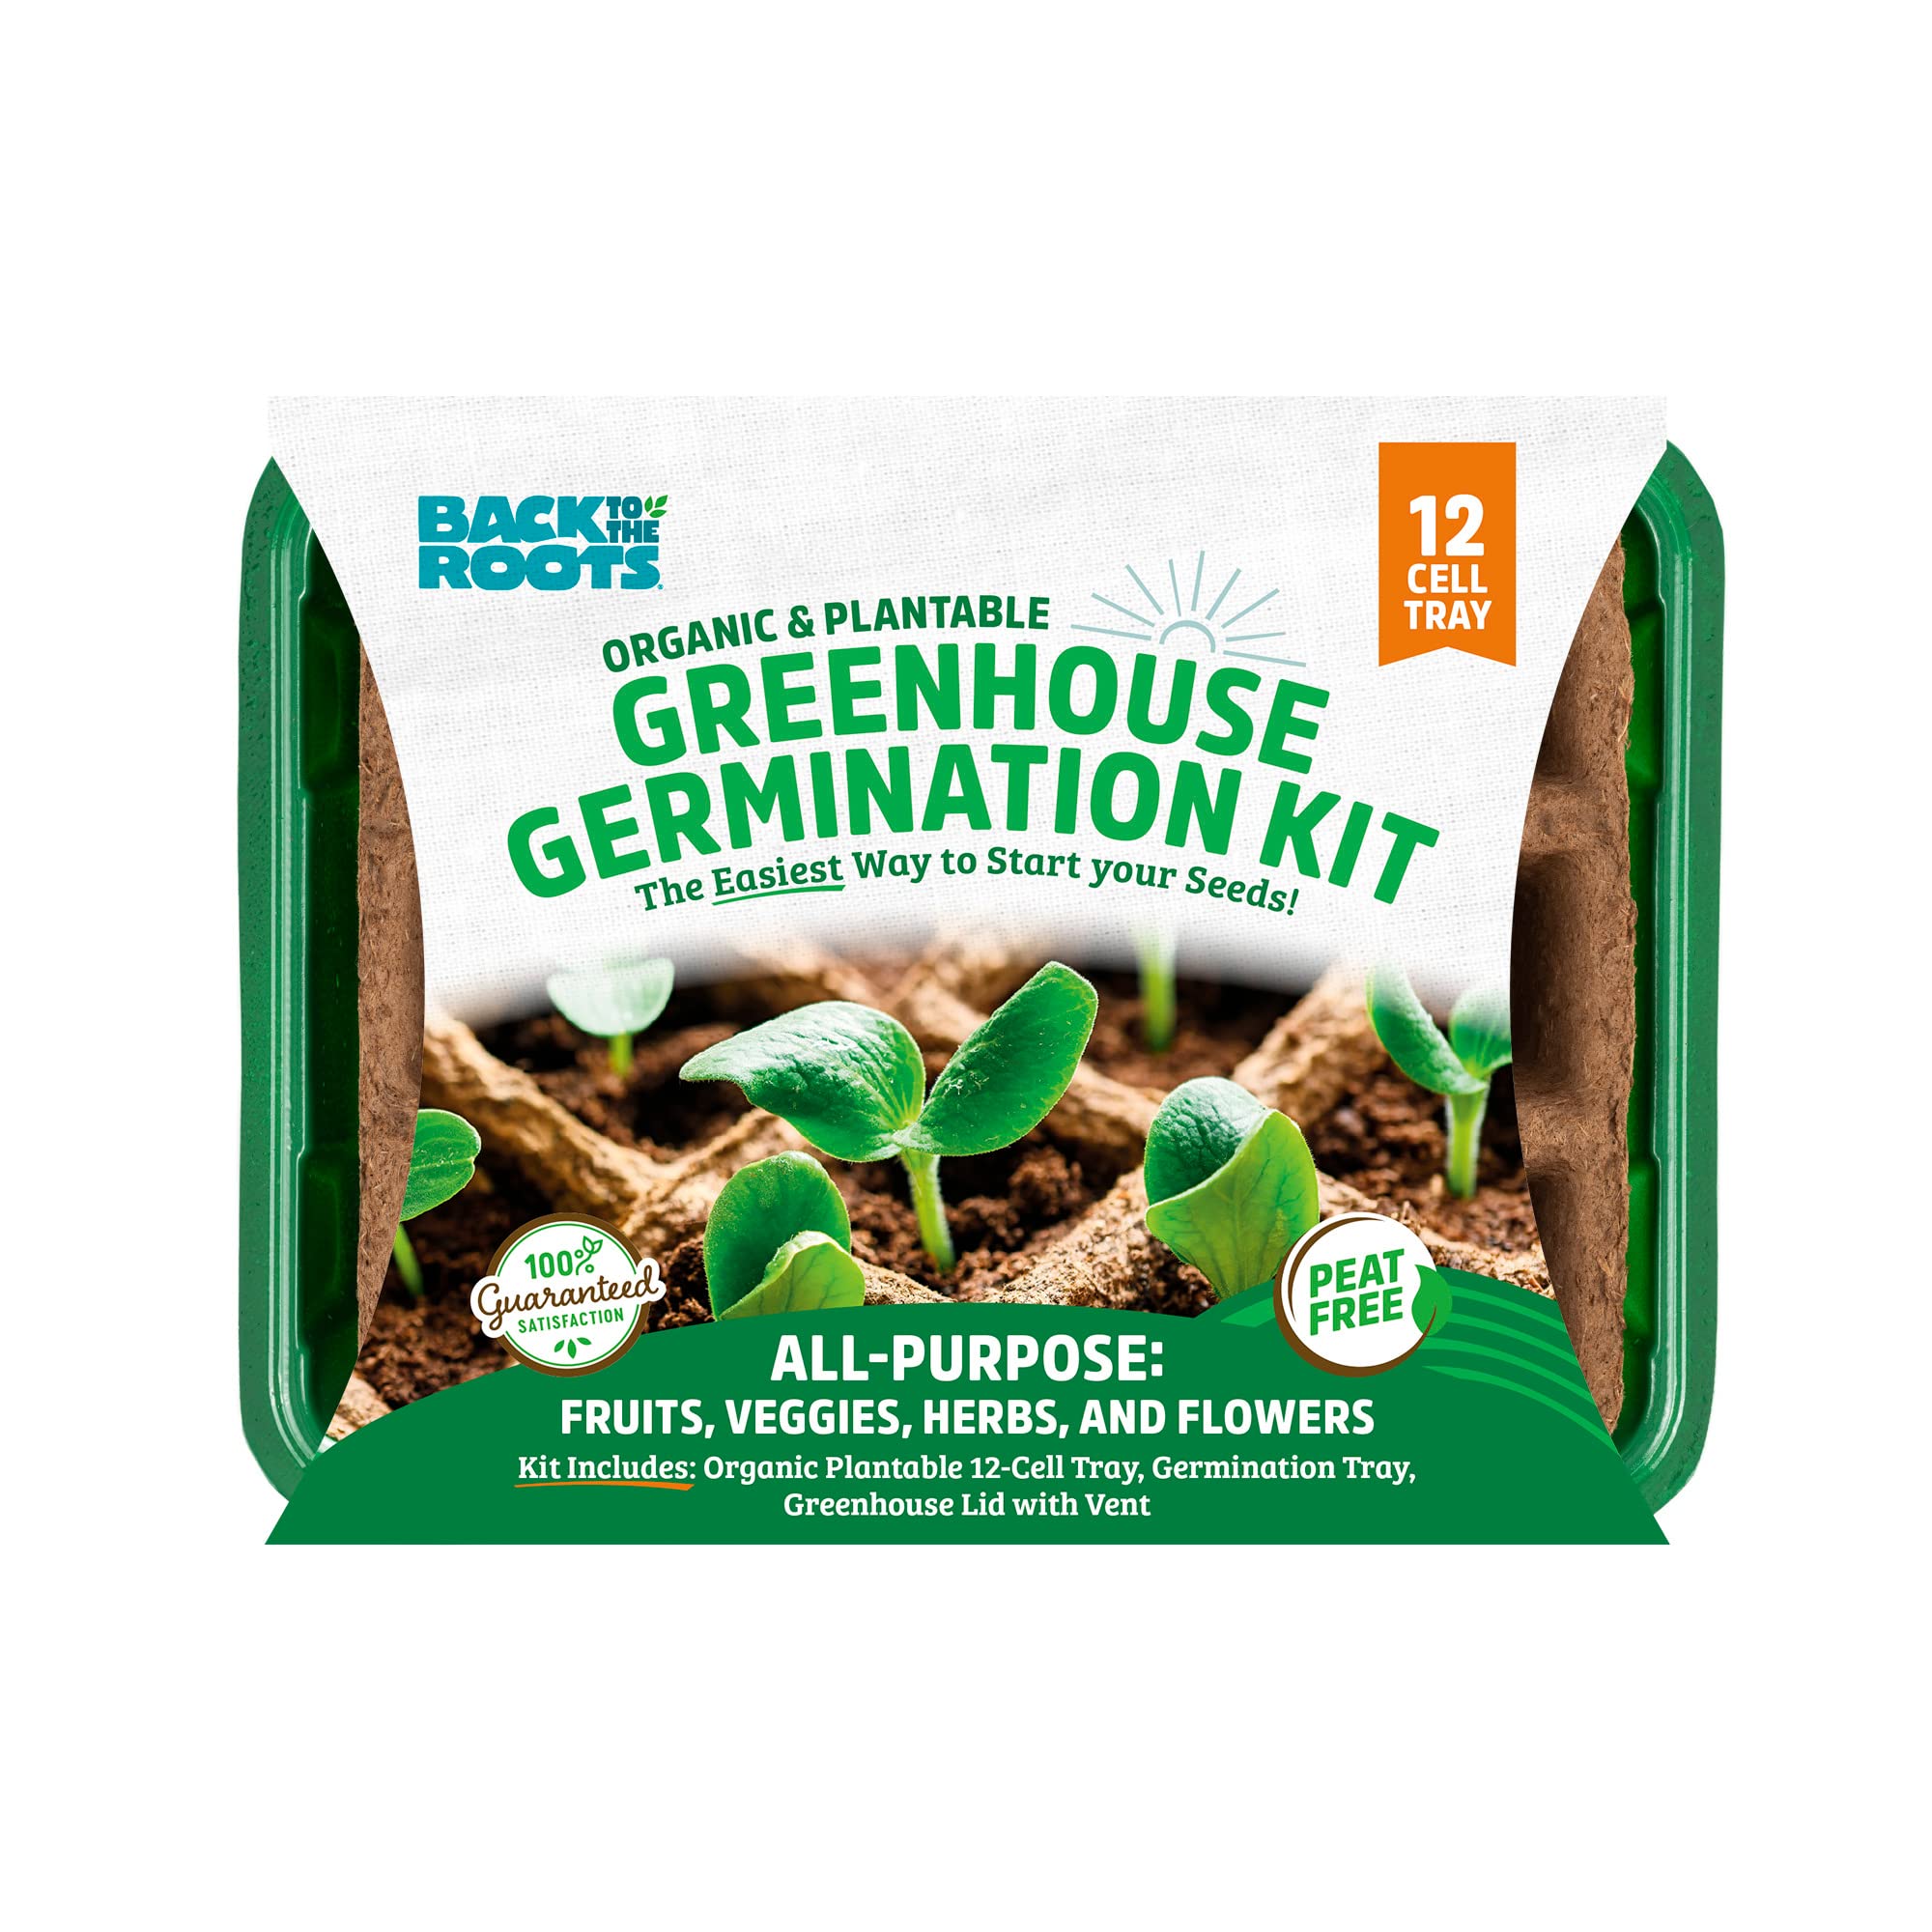 Back to the Roots Greenhouse Germination Kit